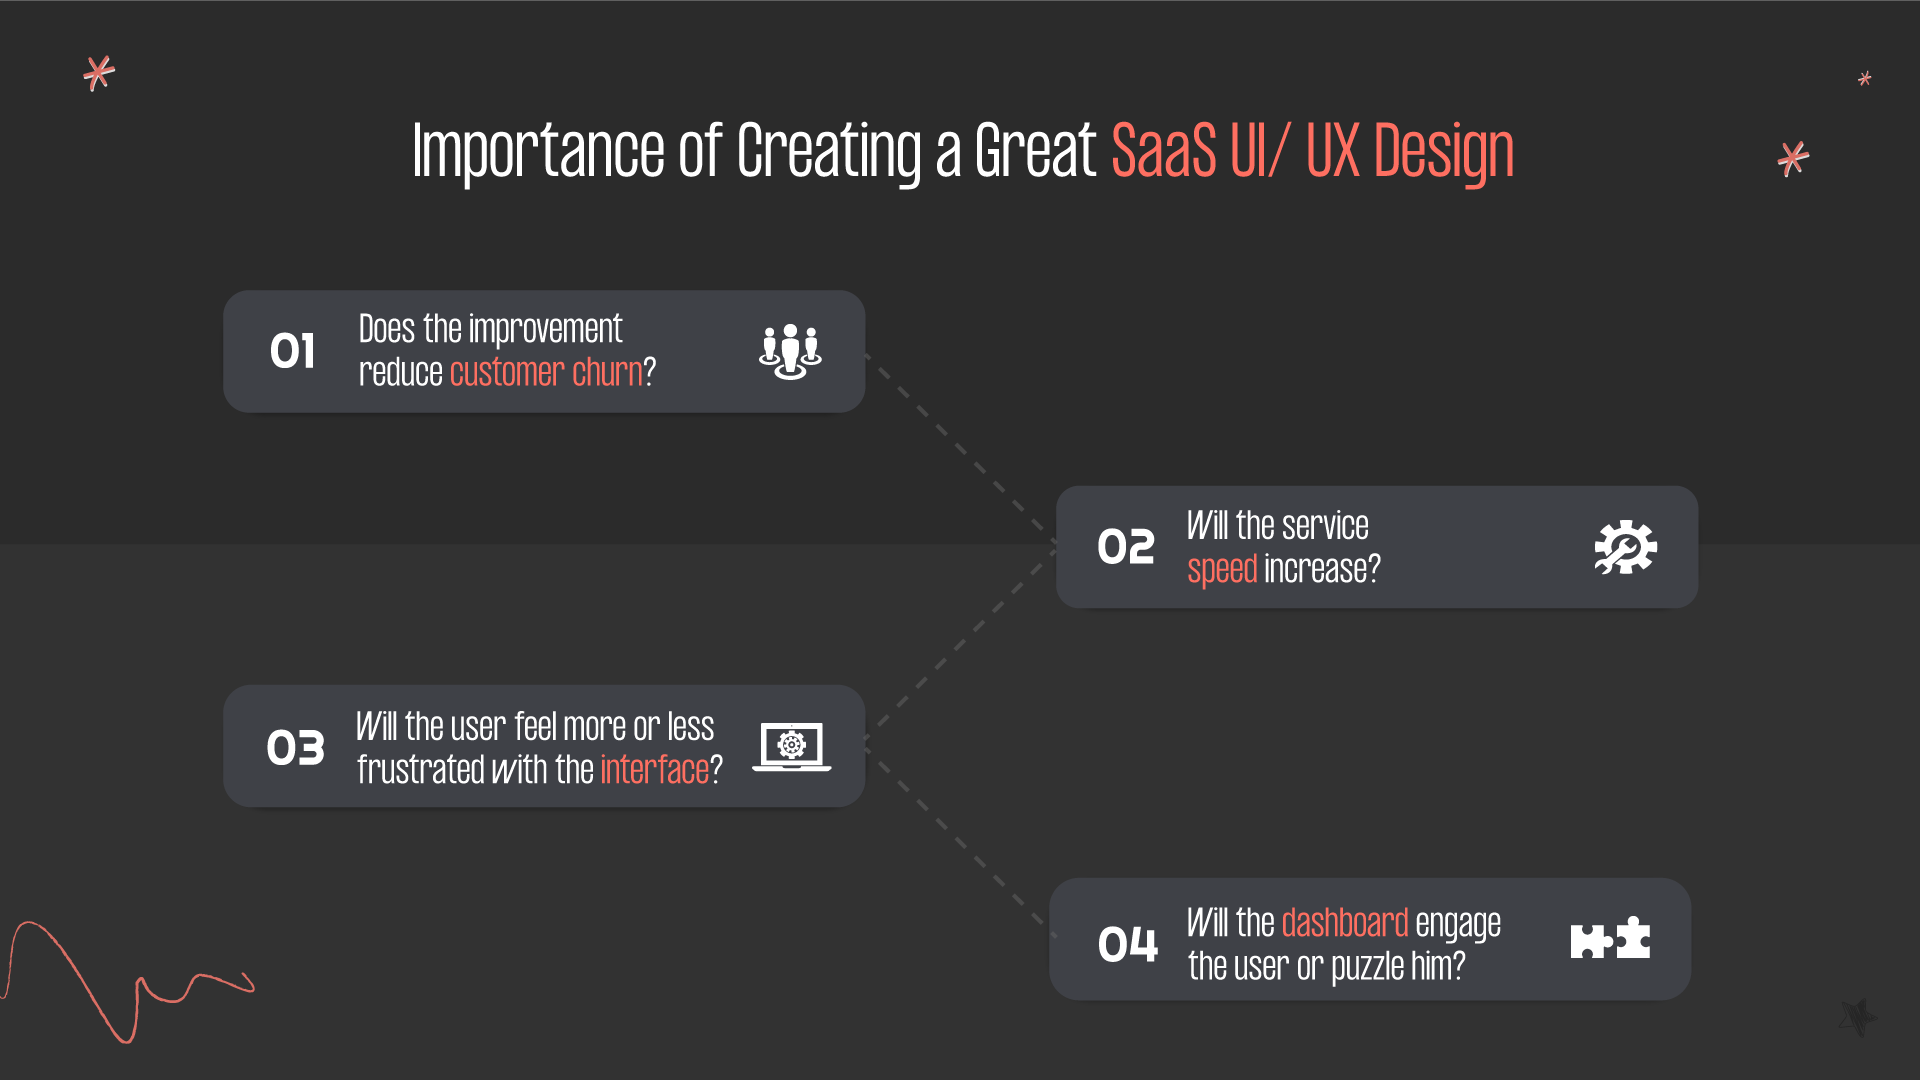 Why is SaaS UX design important?